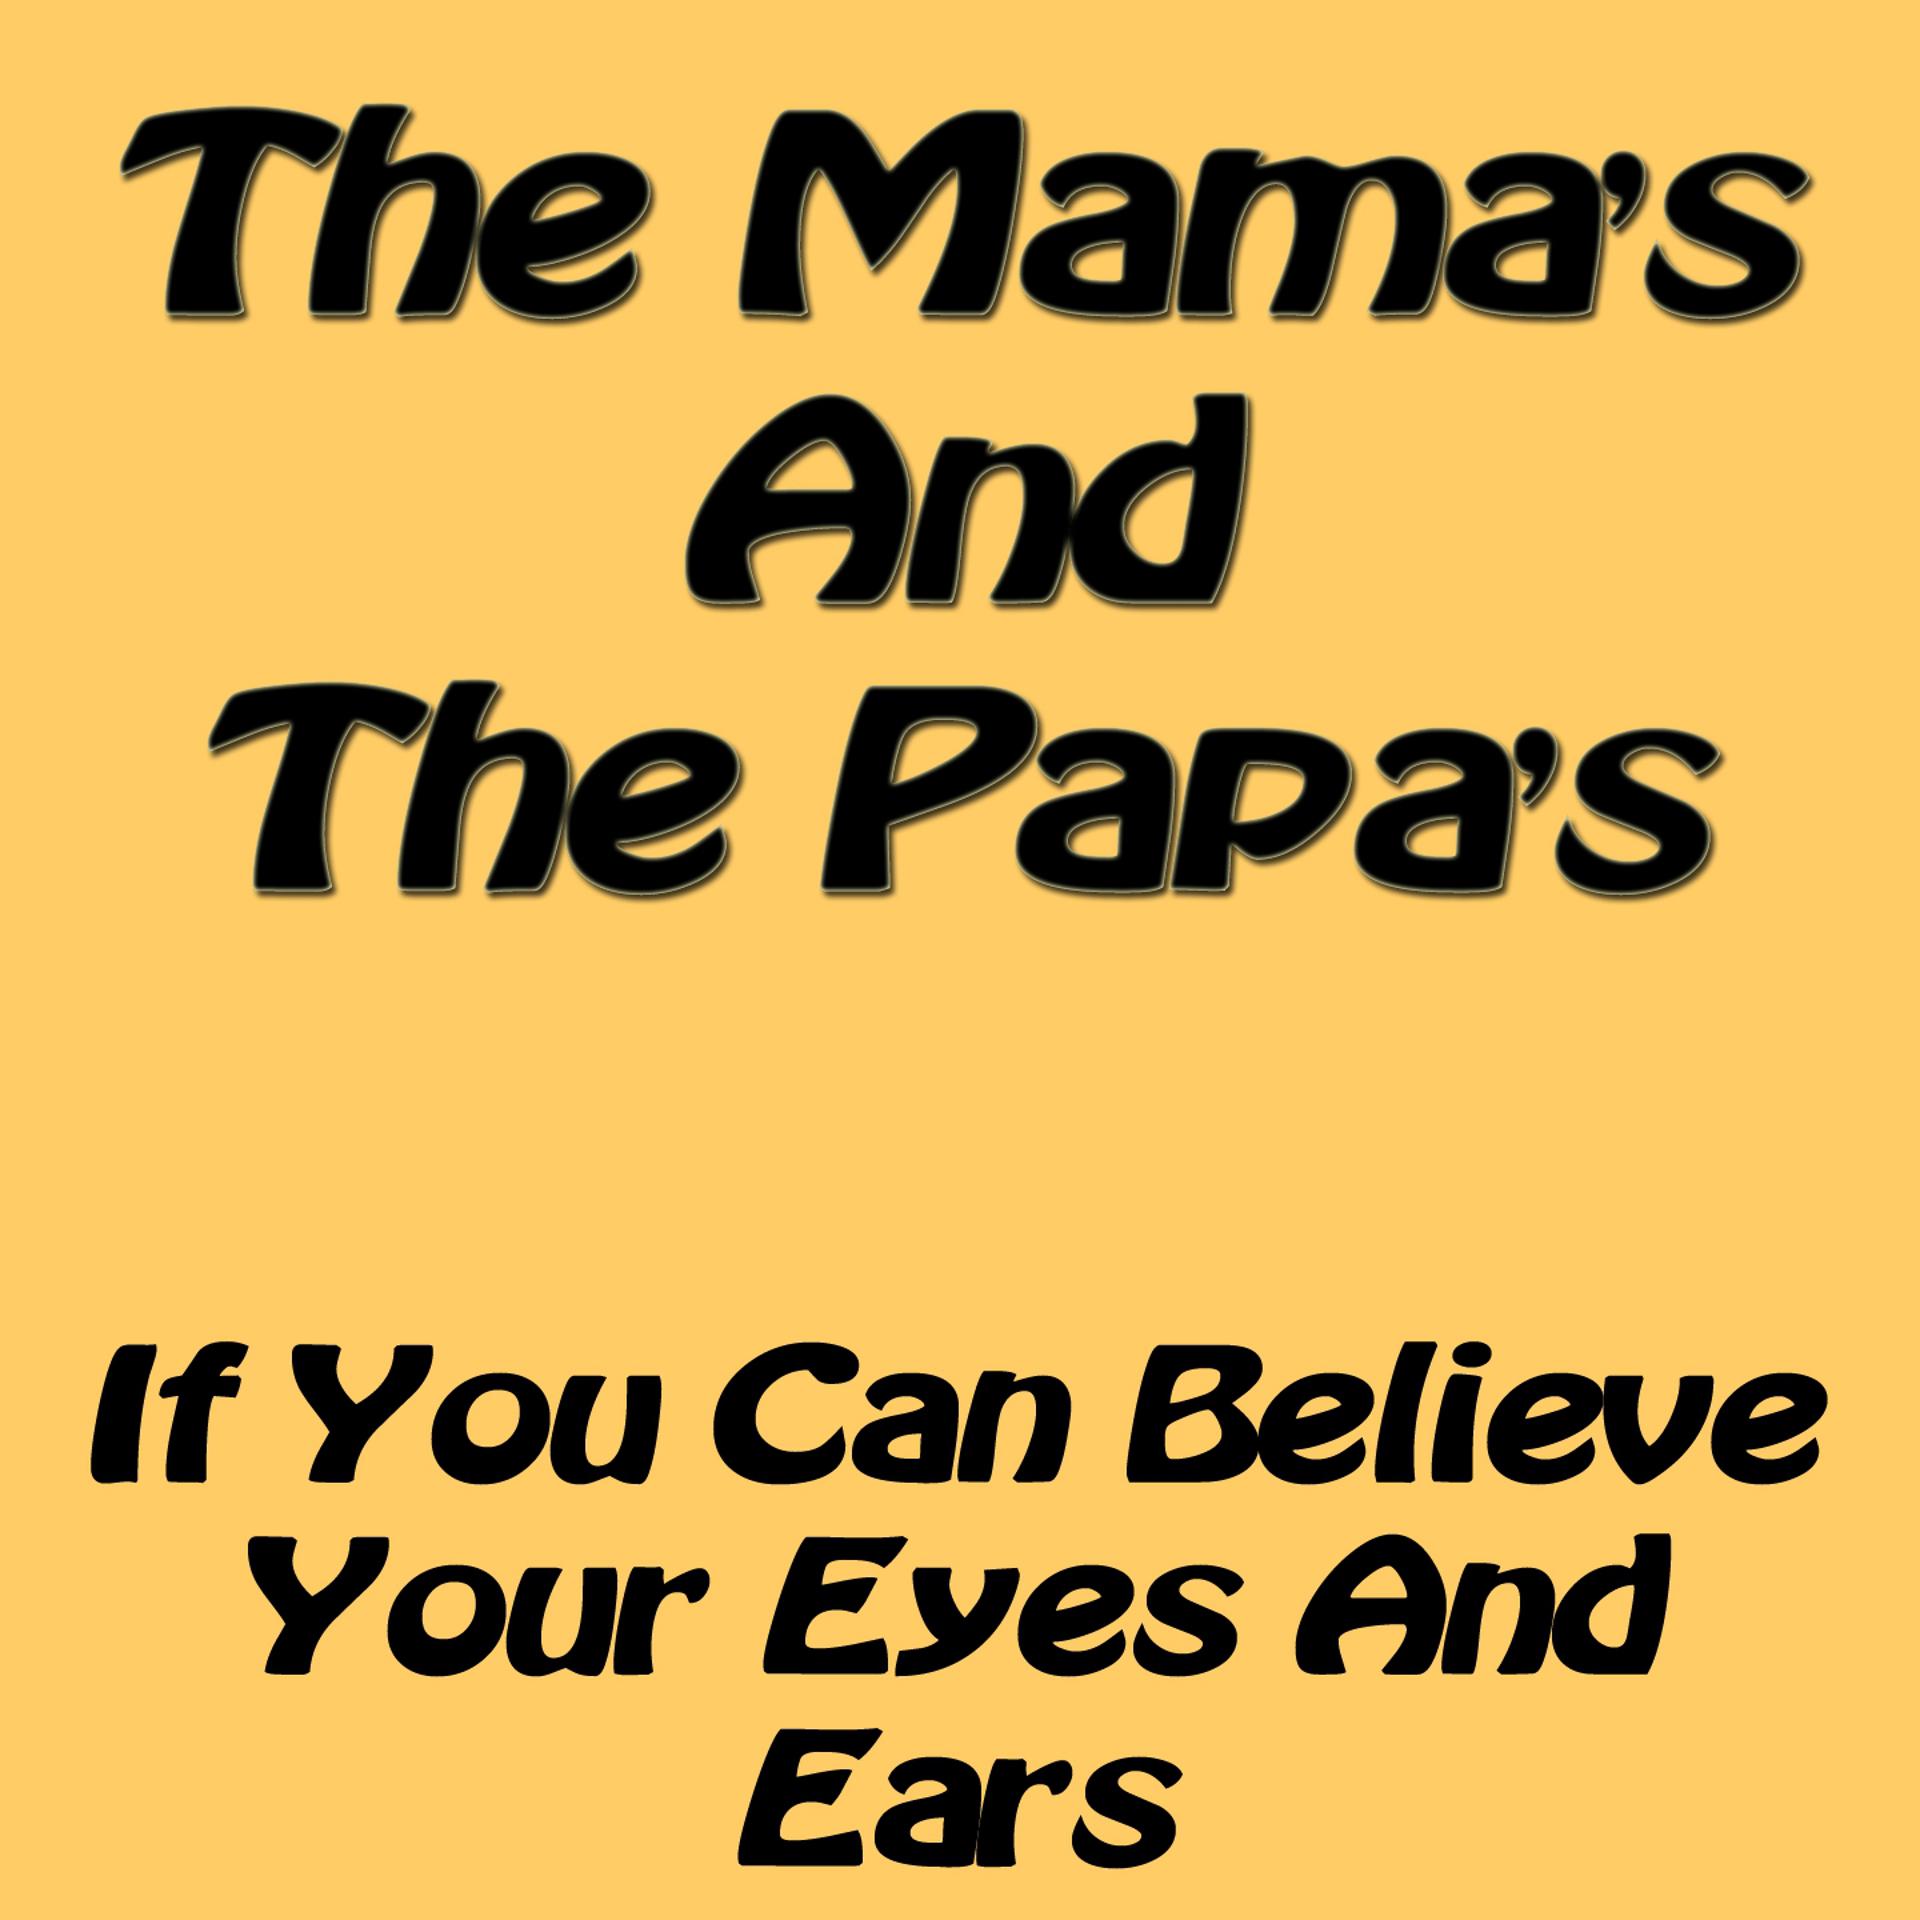 If you can believe your Eyes and Ears the mamas the Papas. The mamas the Papas album if you can believe your Eyes. Can believe. The mamas and Papas if you can believe your Eyes and Ears обложка.